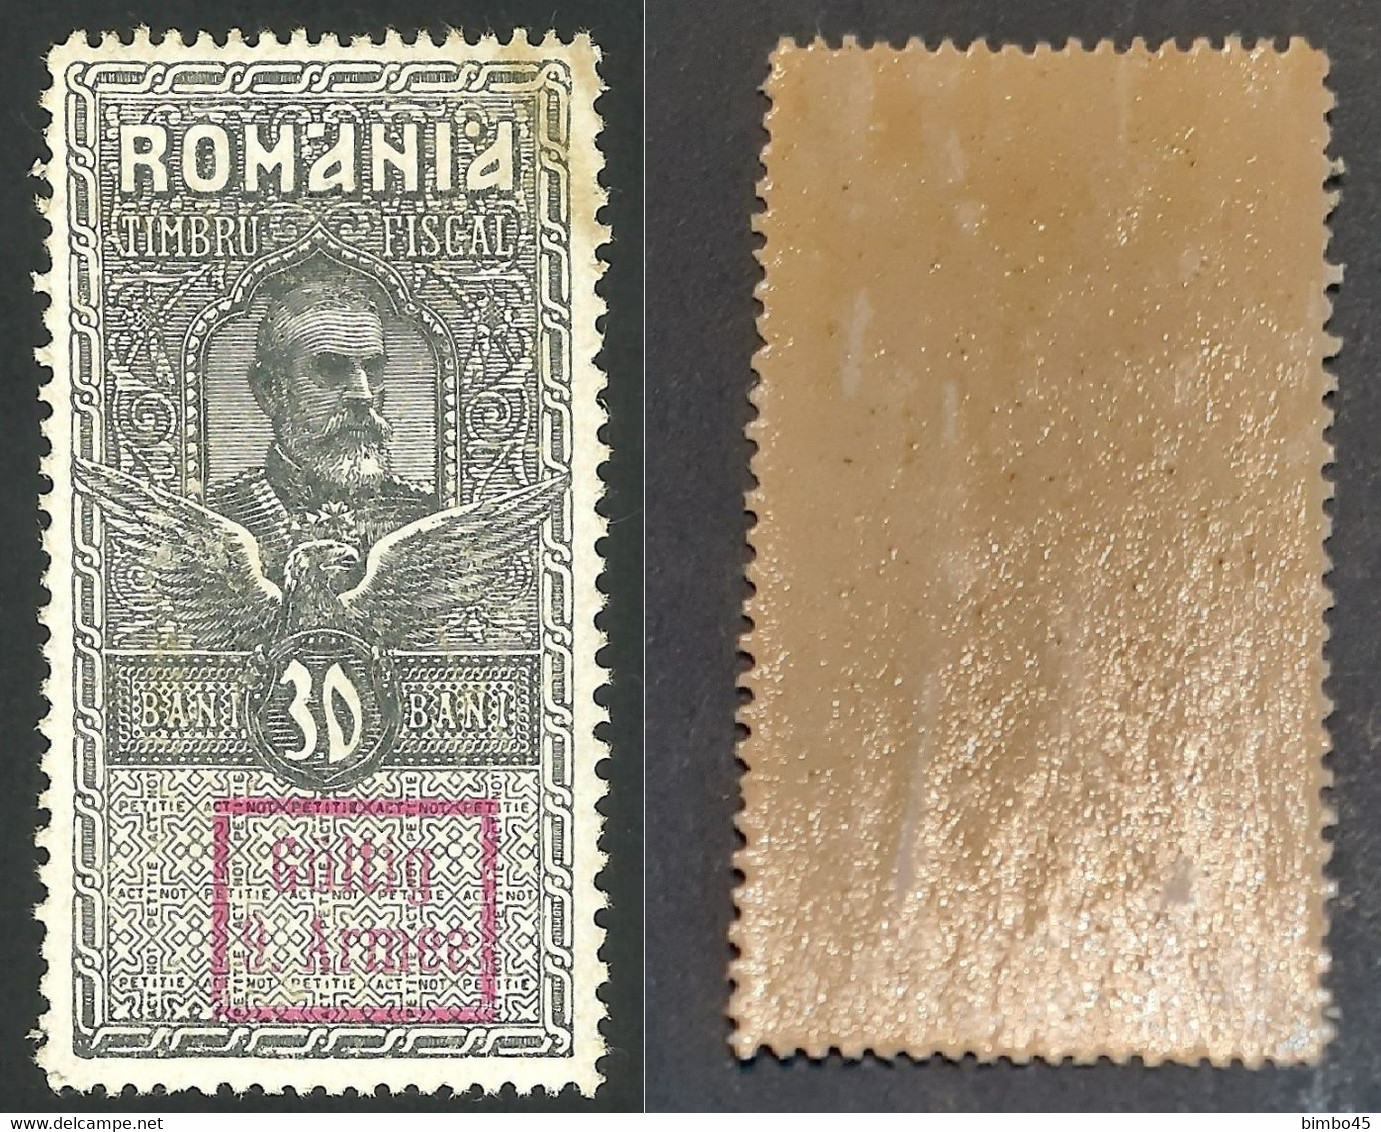 Romania 1917  MNH -- Revenue Stamp / German Occupation / Gultig 9 Armee - Fiscale Zegels